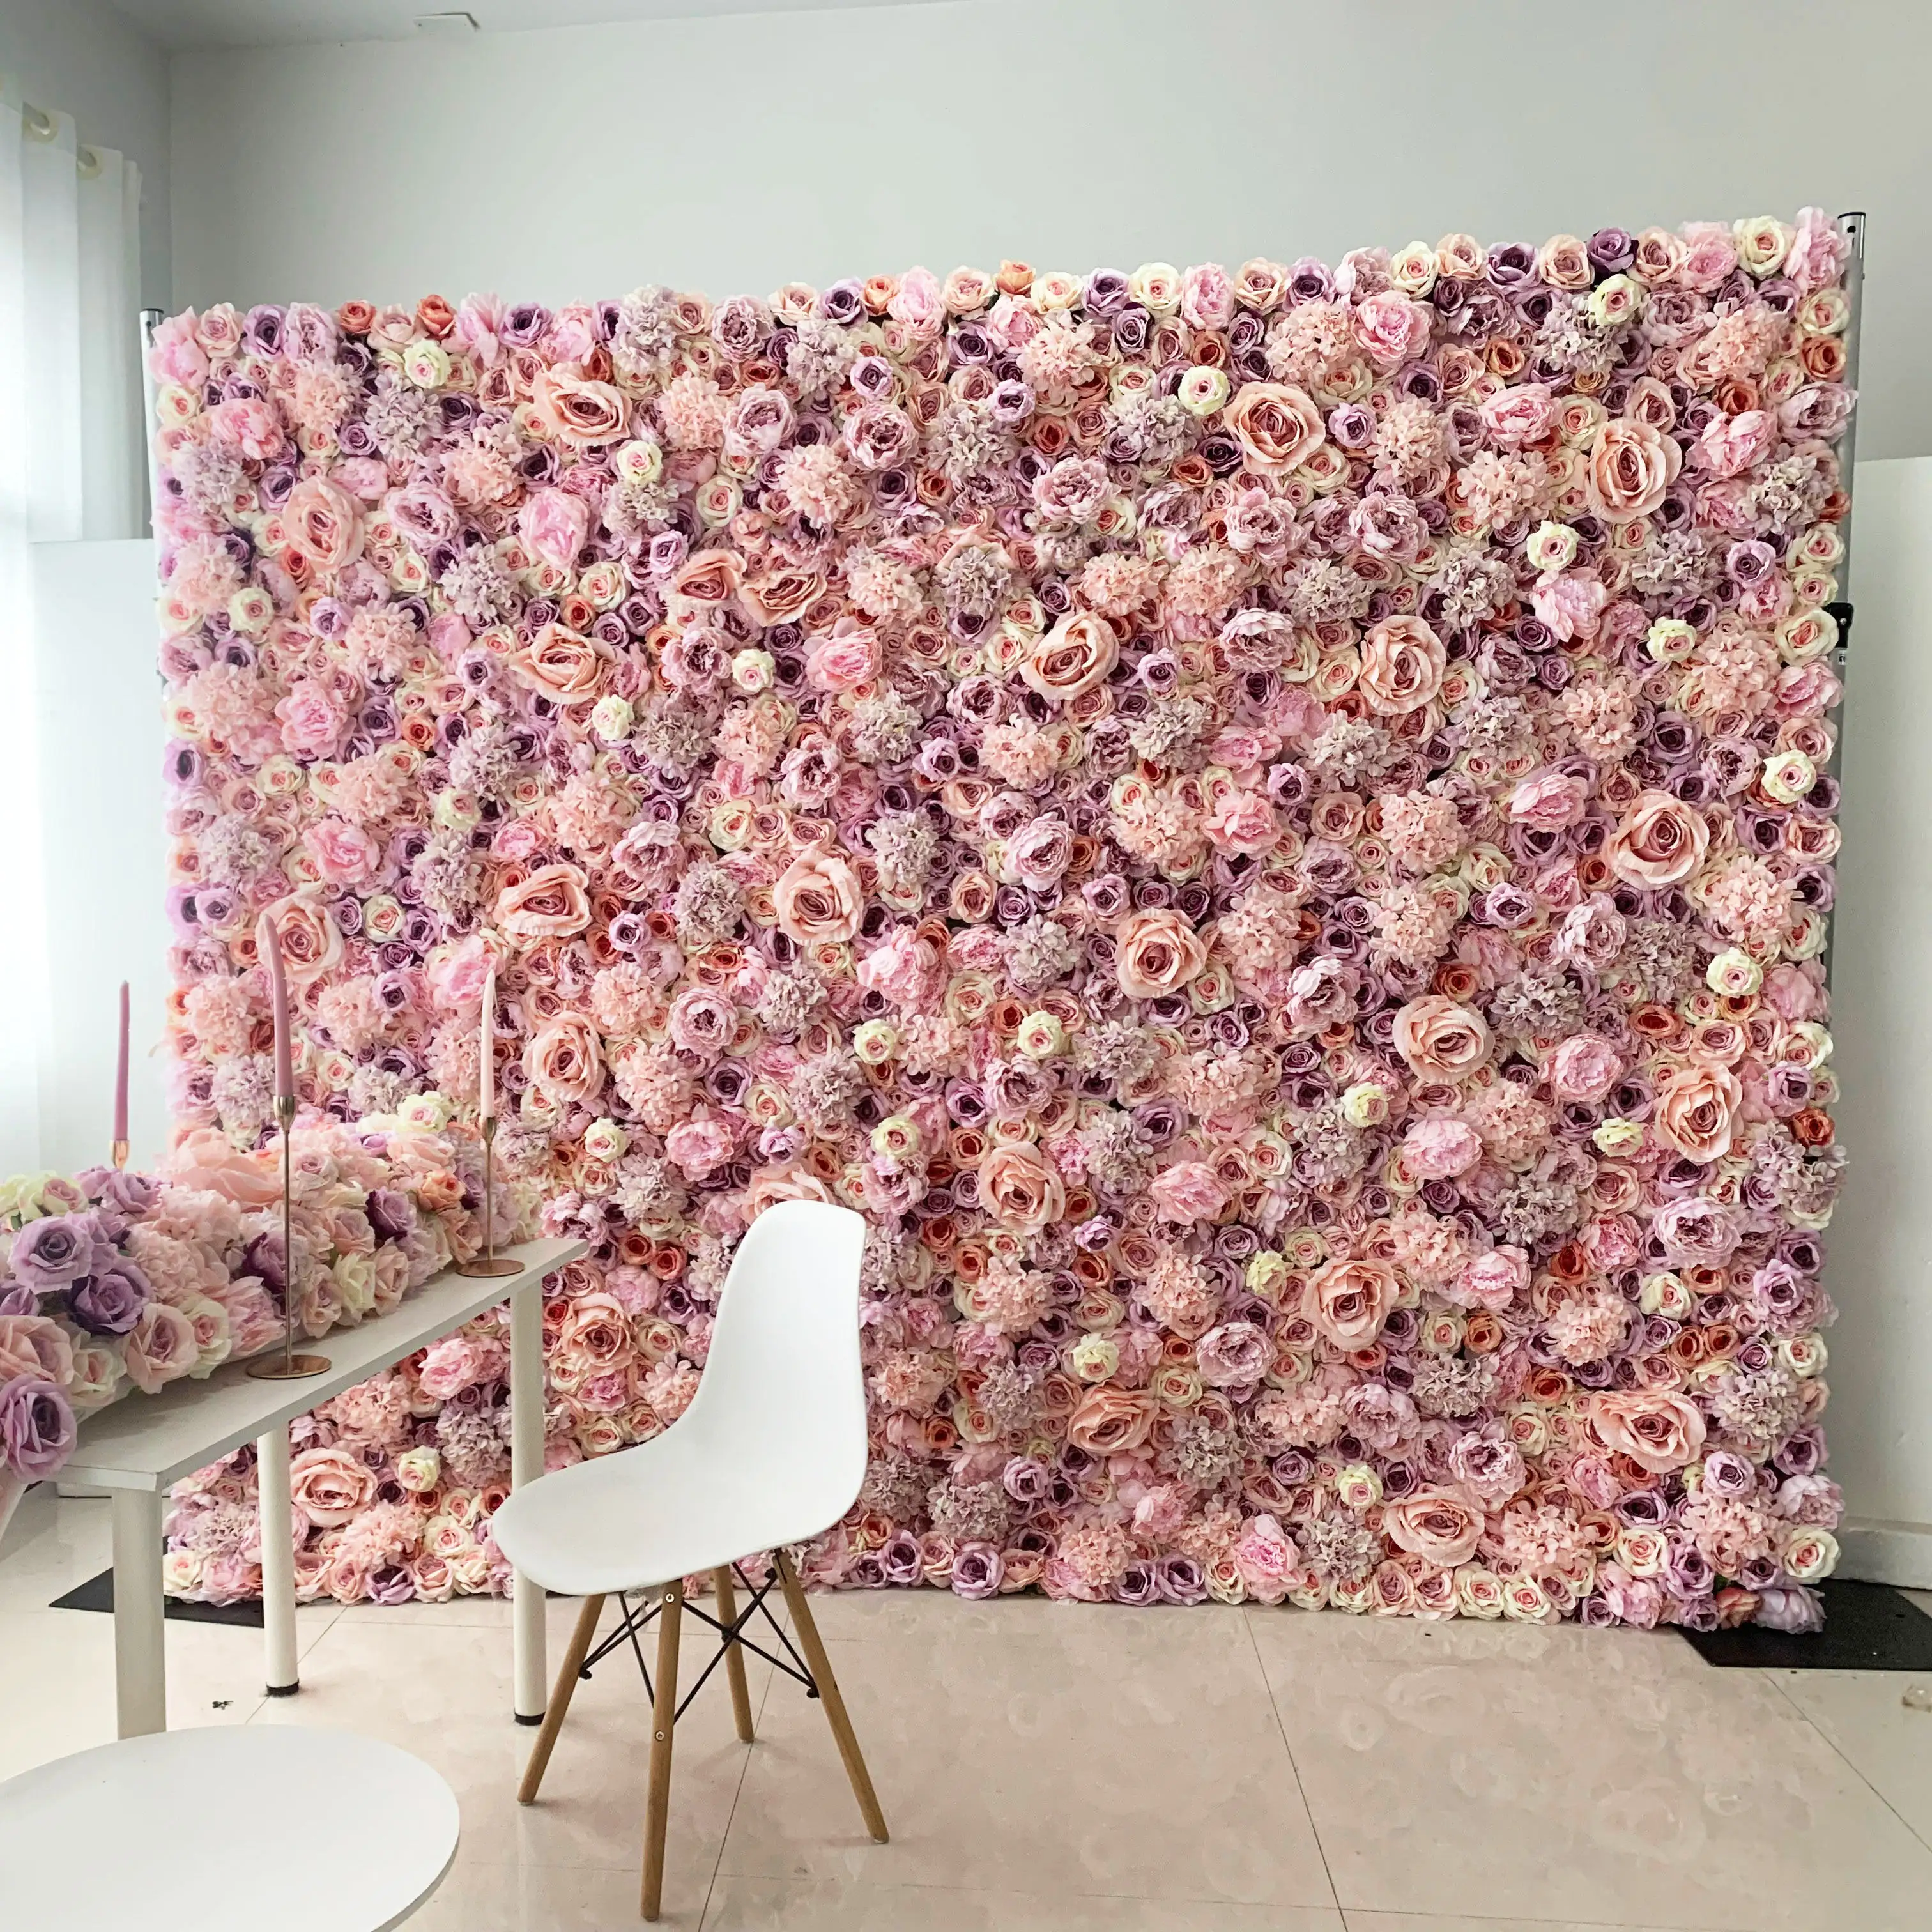 Yirong Hot artificial white rose 3d hydrangea flower wall backdrop for wedding event stage decoration